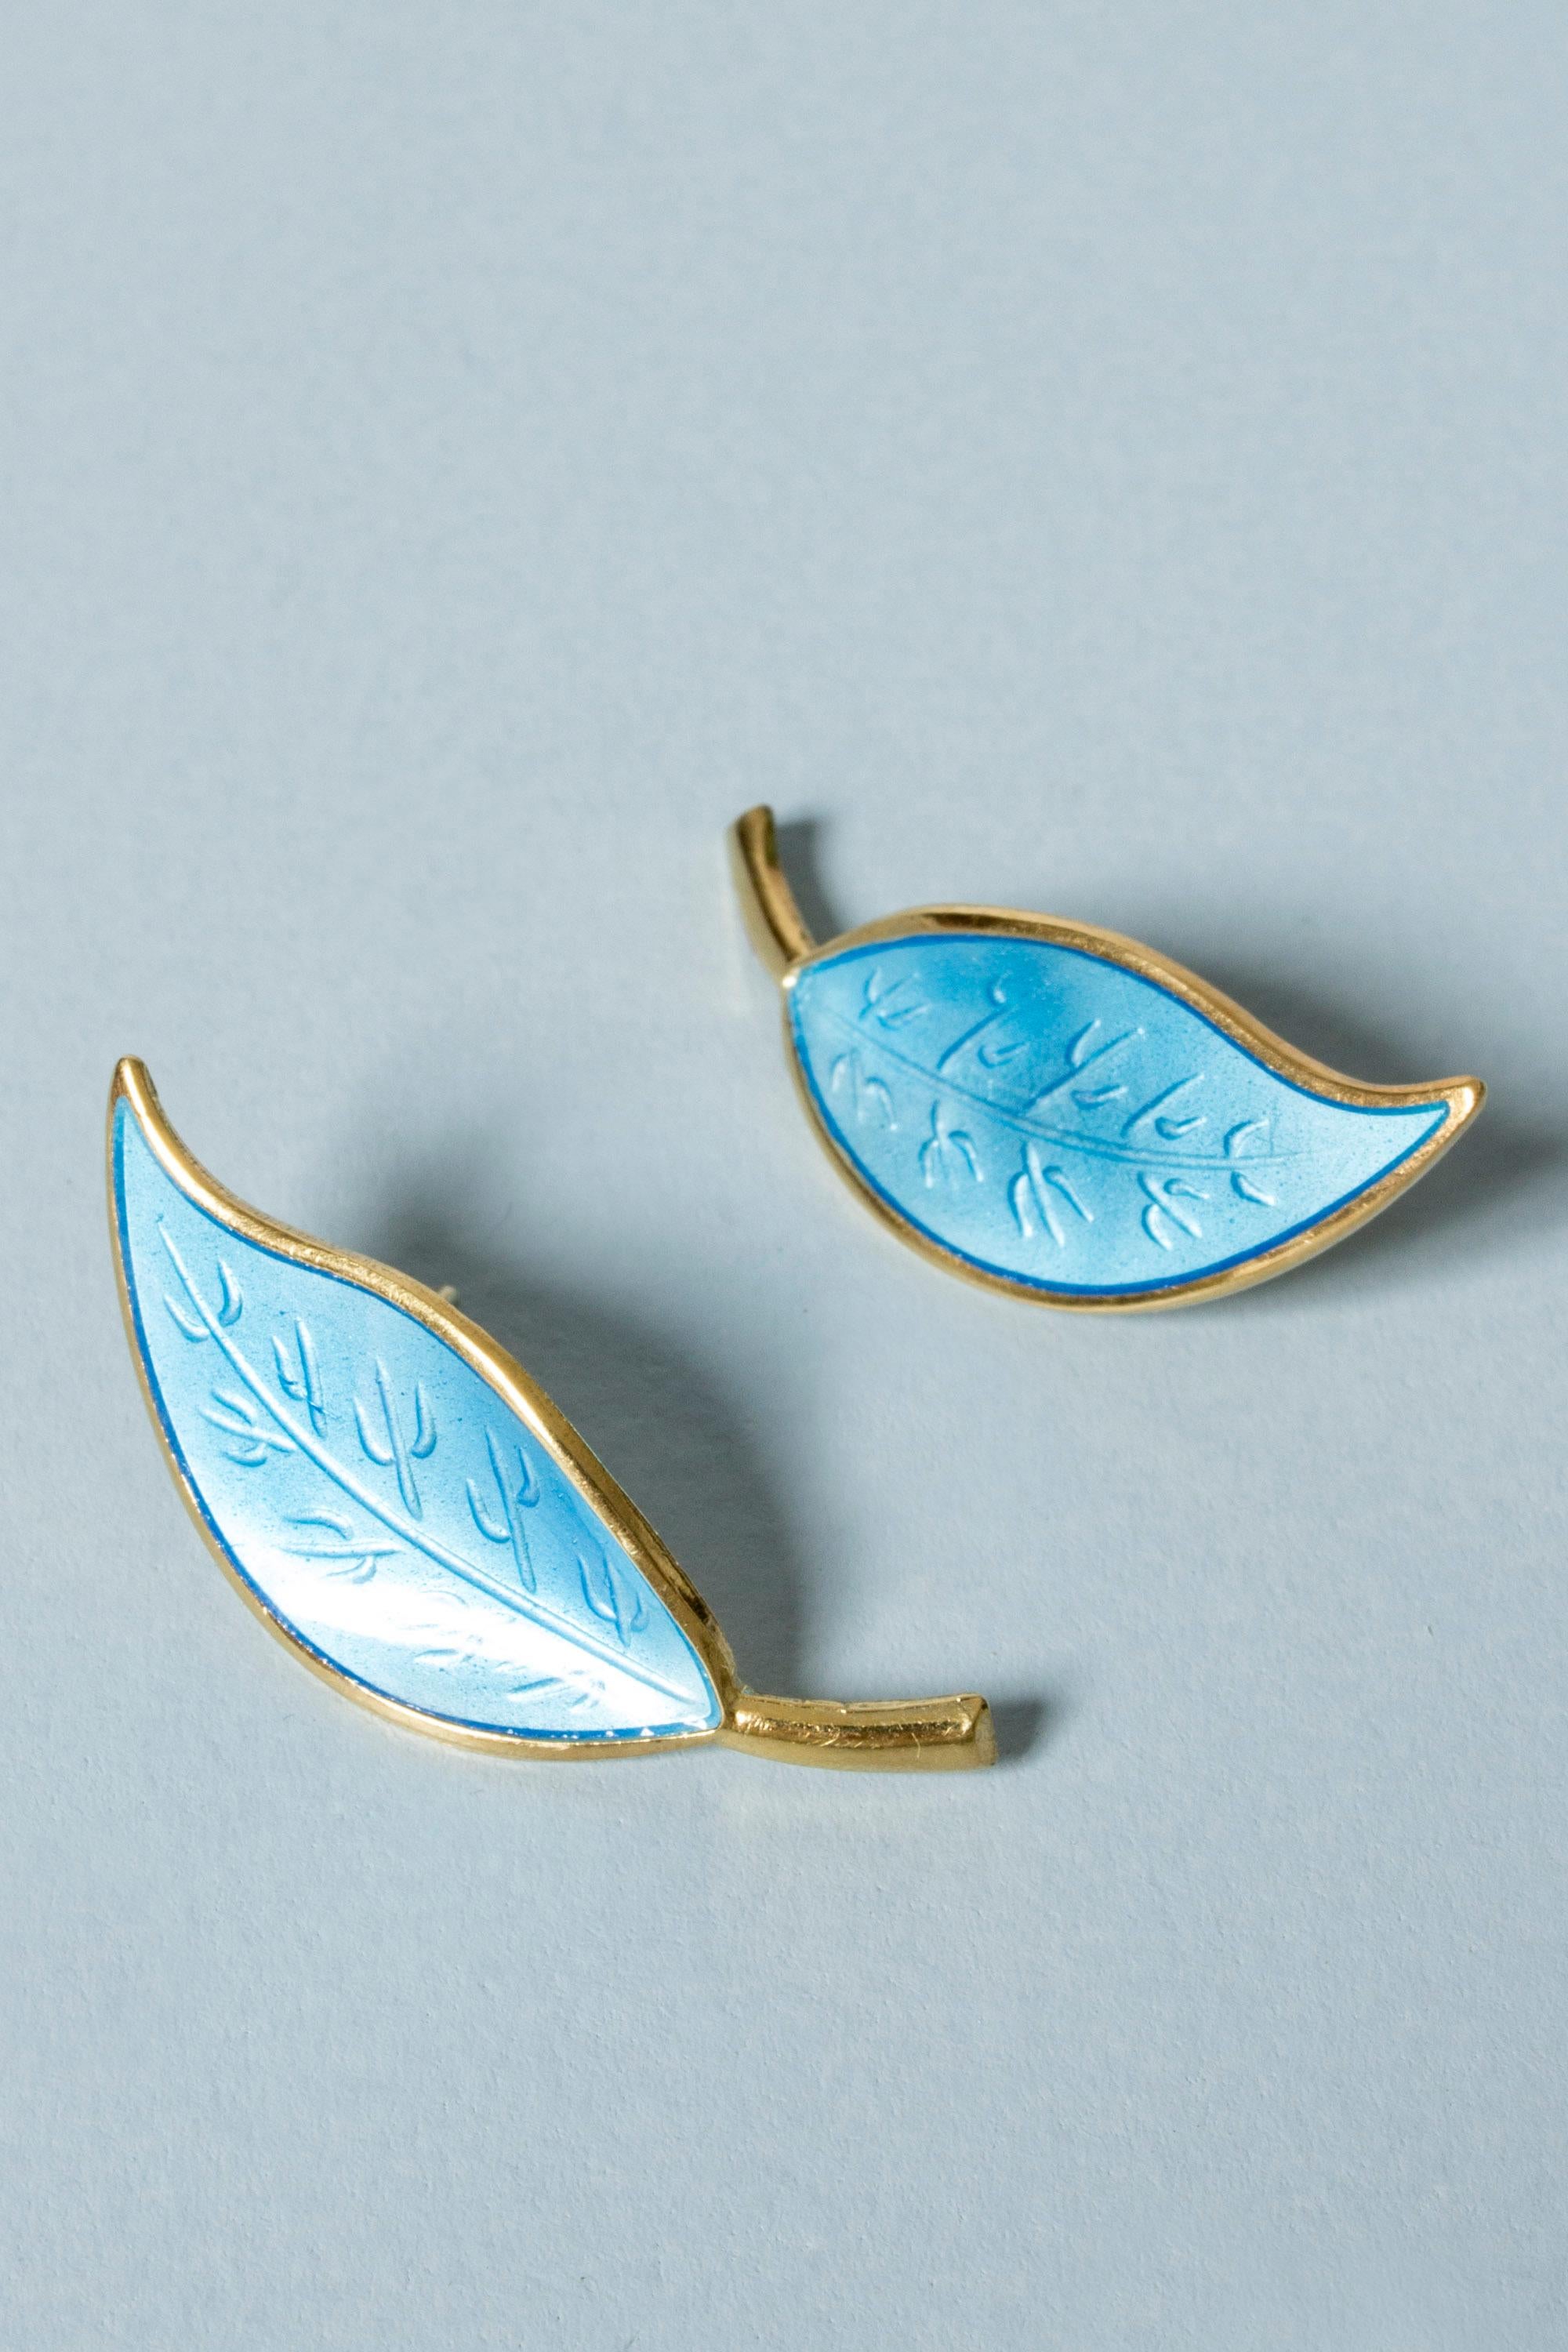 Pair of beautiful silver earrings from David Andersen in the form of leaves. Designed with vibrant blue enamel against the gilded silver.